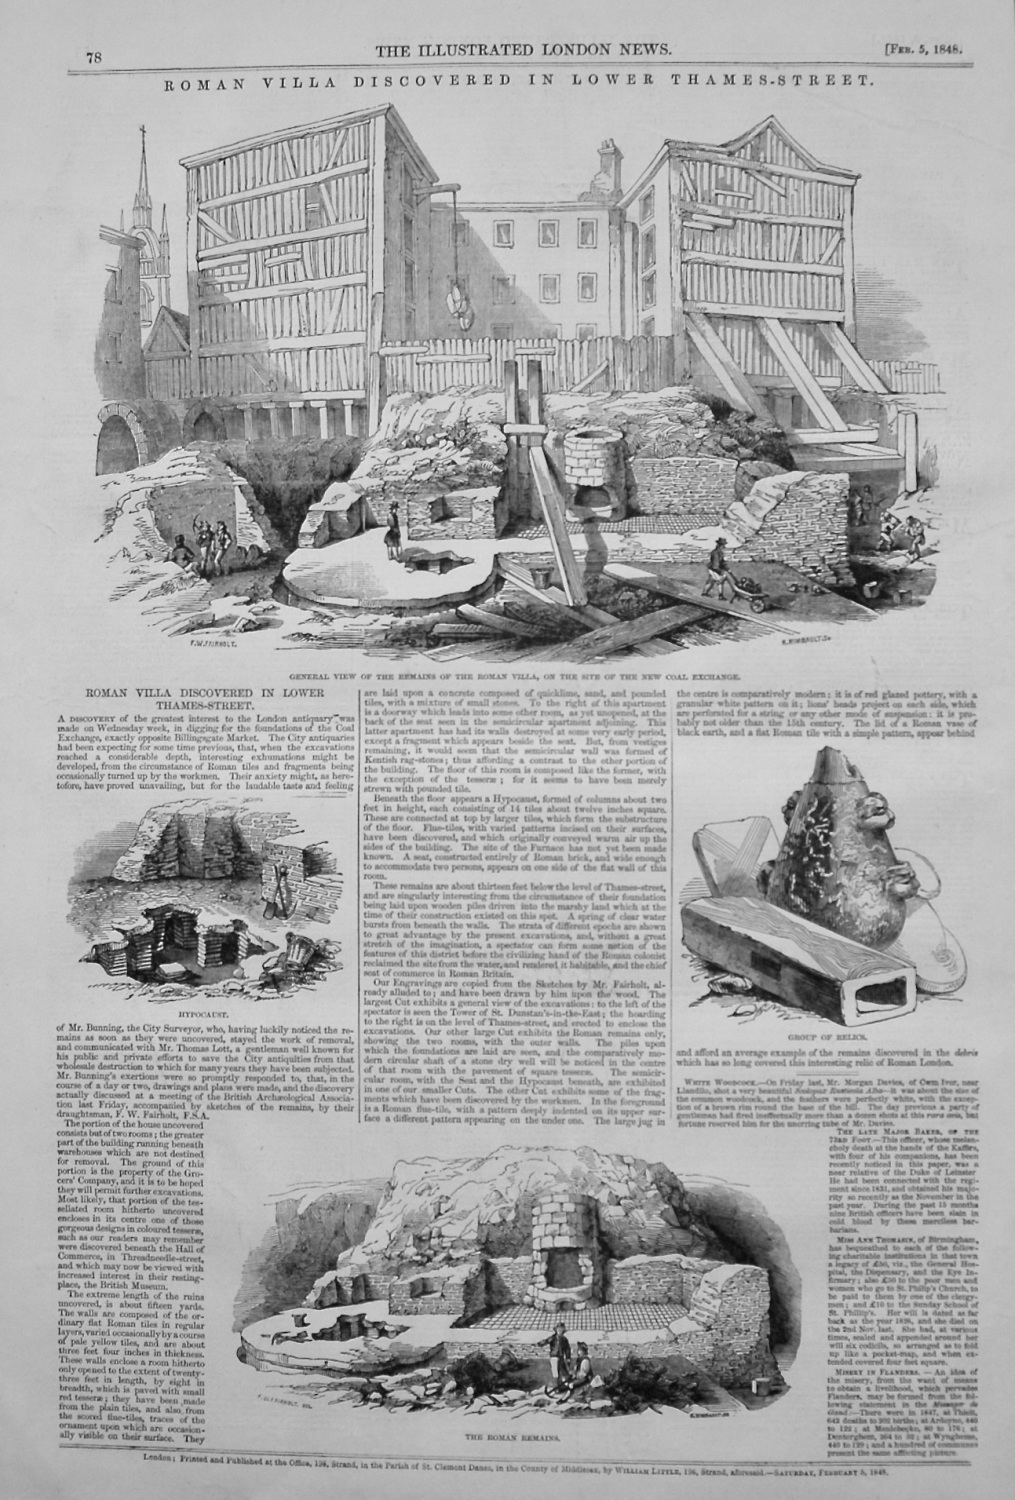 Roman Villa Discovered in Lower Thames-Street. 1848